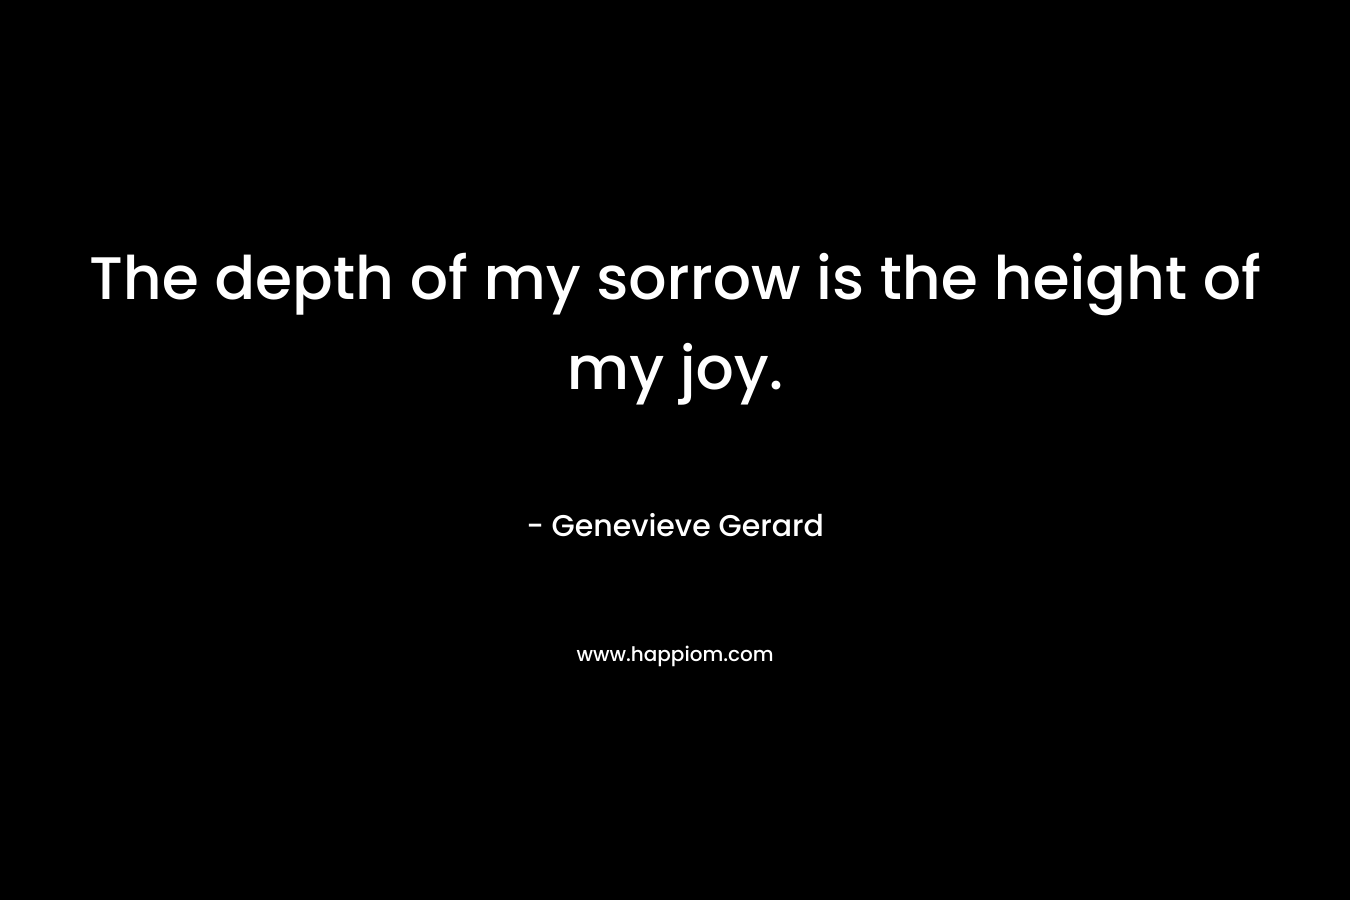 The depth of my sorrow is the height of my joy. – Genevieve Gerard